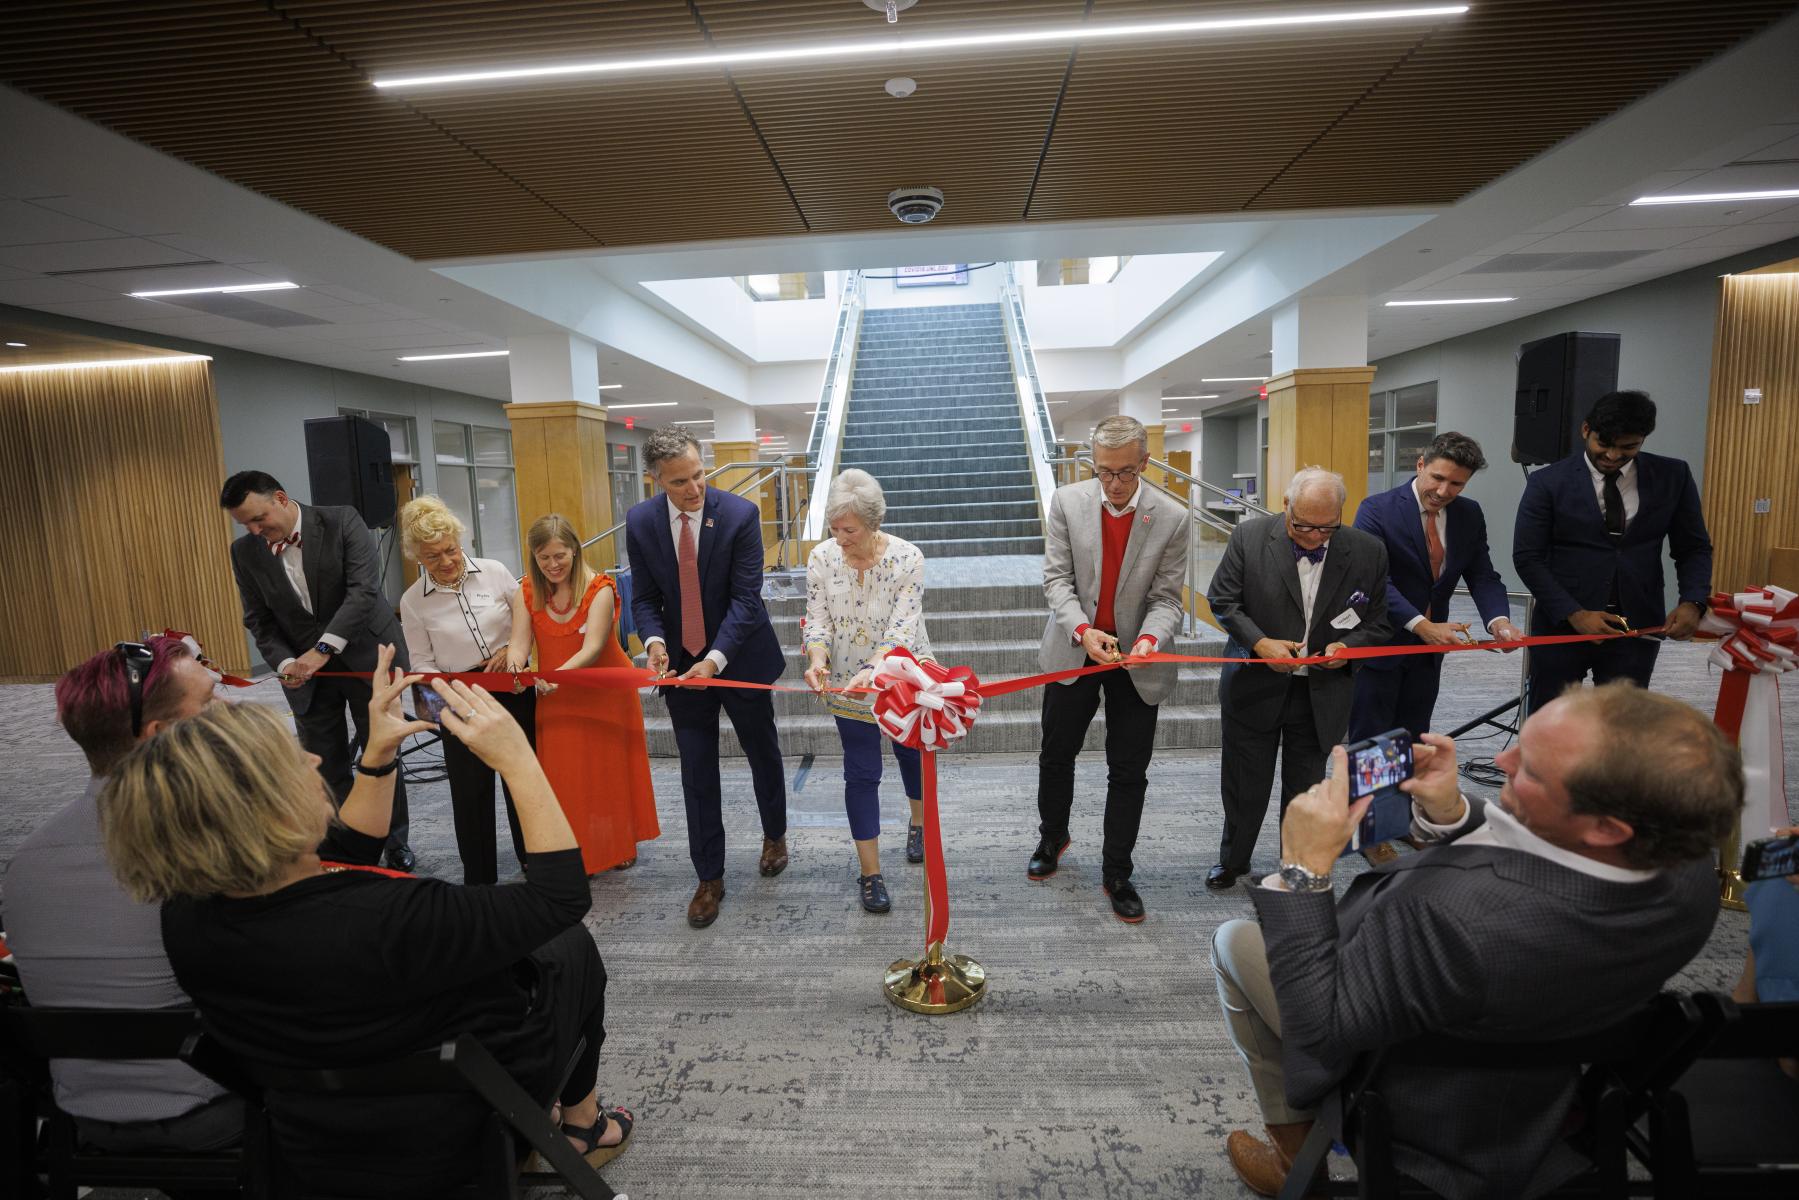 Ribbon cutting at the grand re-opening for the Schmid Law Library